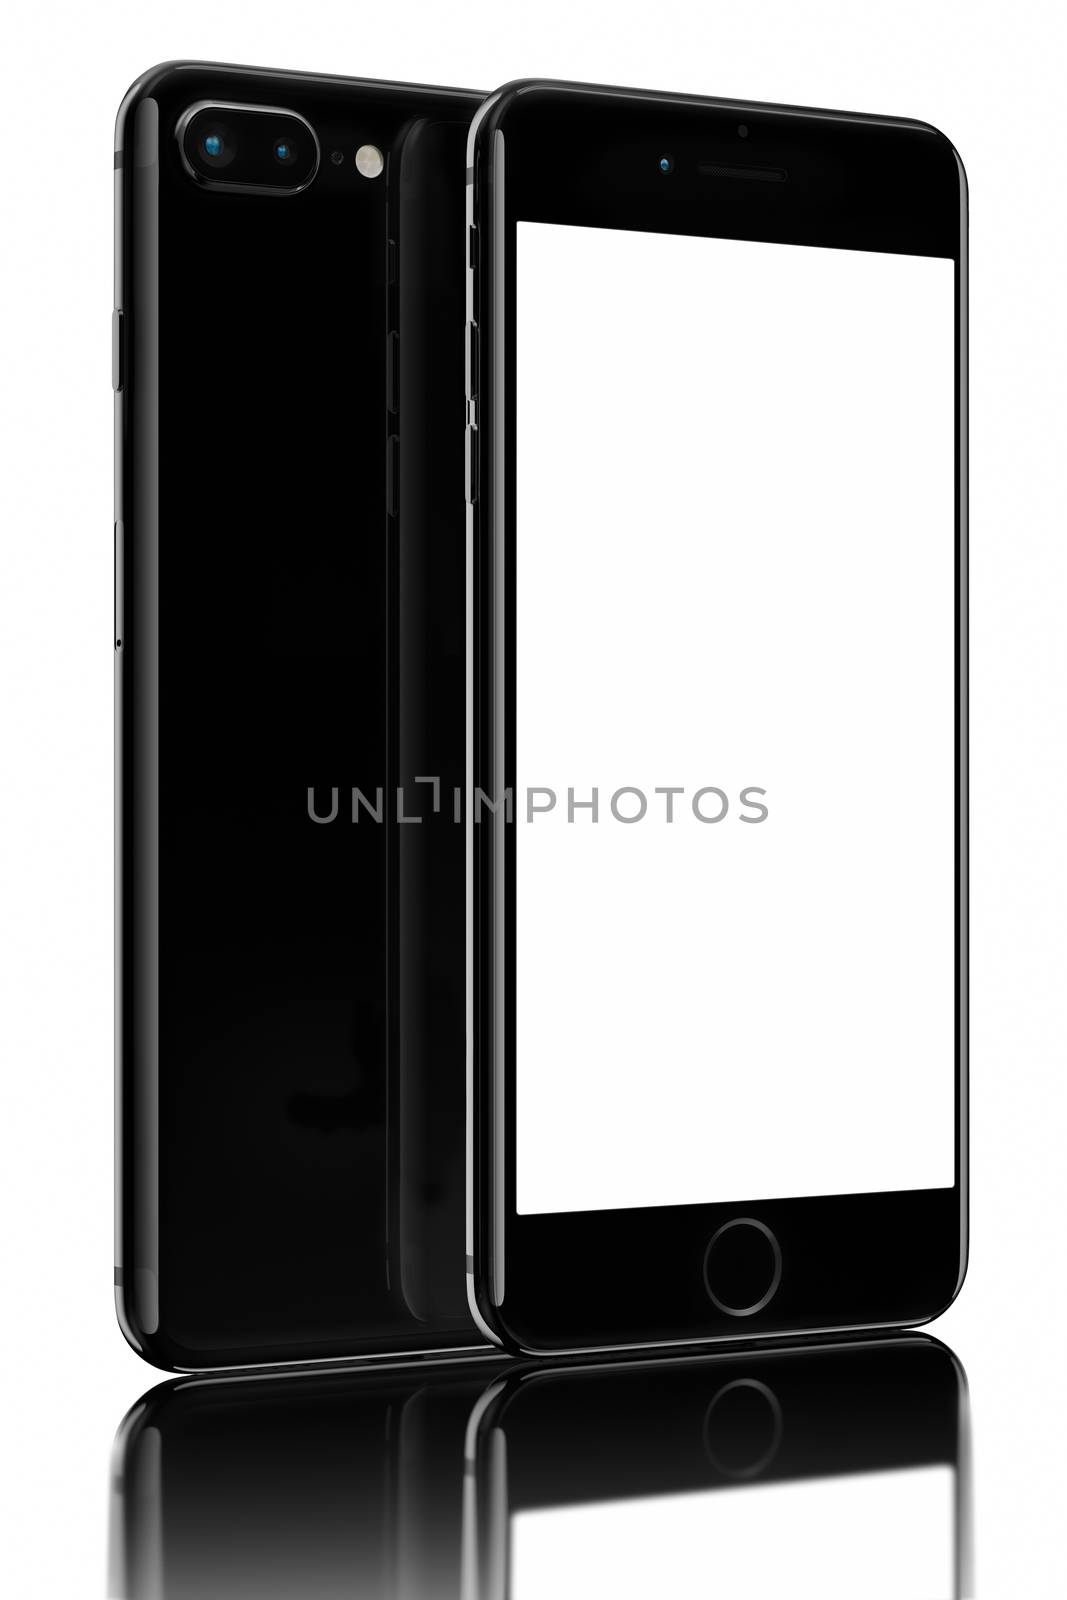 Jet Black SmartPhone Plus with dual photo camera on black background. Devices displaying blank screen.